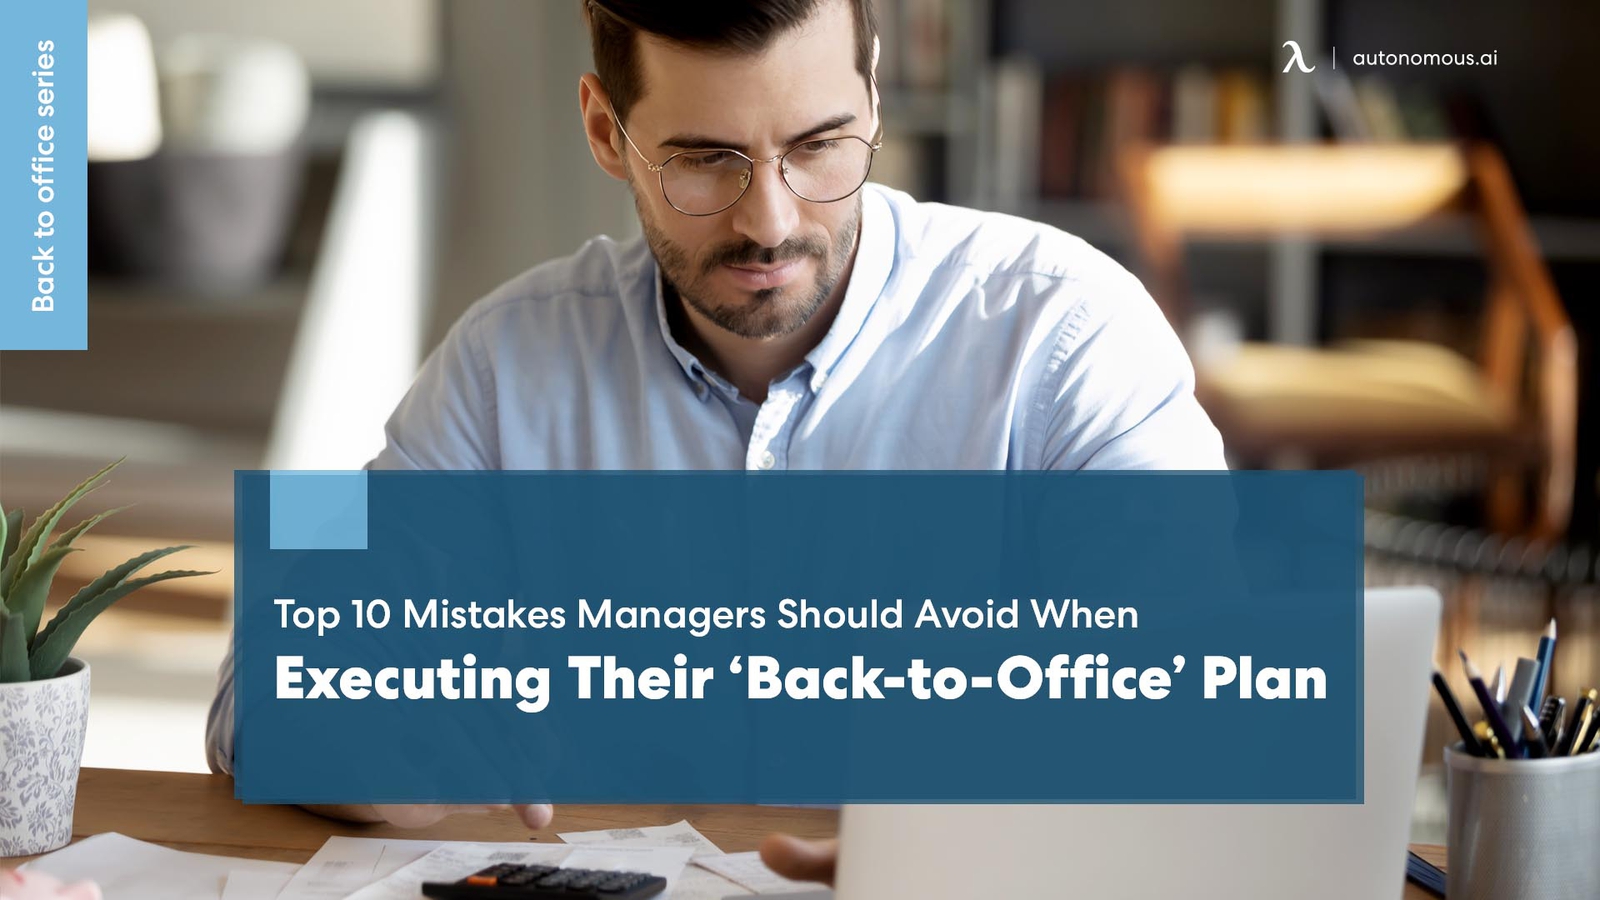 Top 10 Mistakes Managers Should Avoid When Executing Their ‘Back-to-Office’ Plan